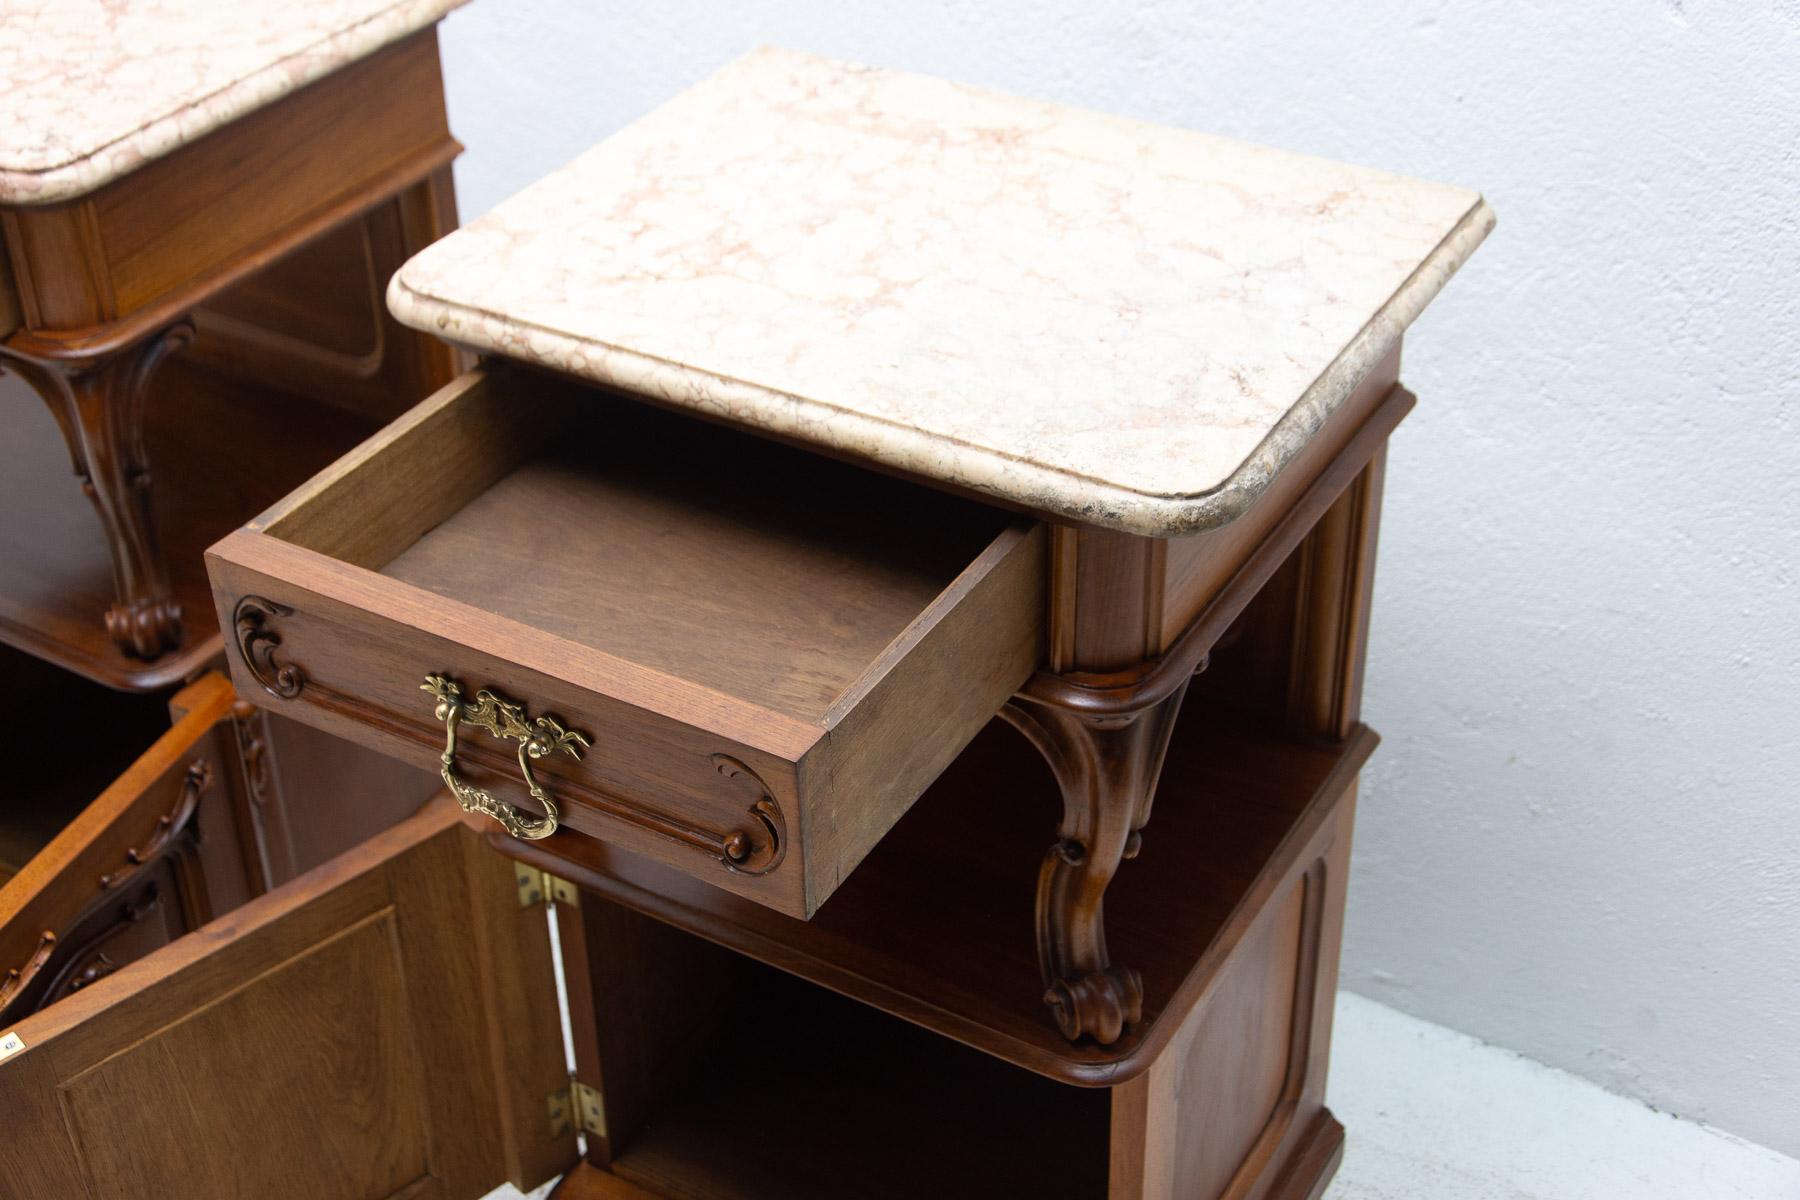 Pair of Fully Restored Historicist Bedside Tables, 1910, Austria For Sale 4